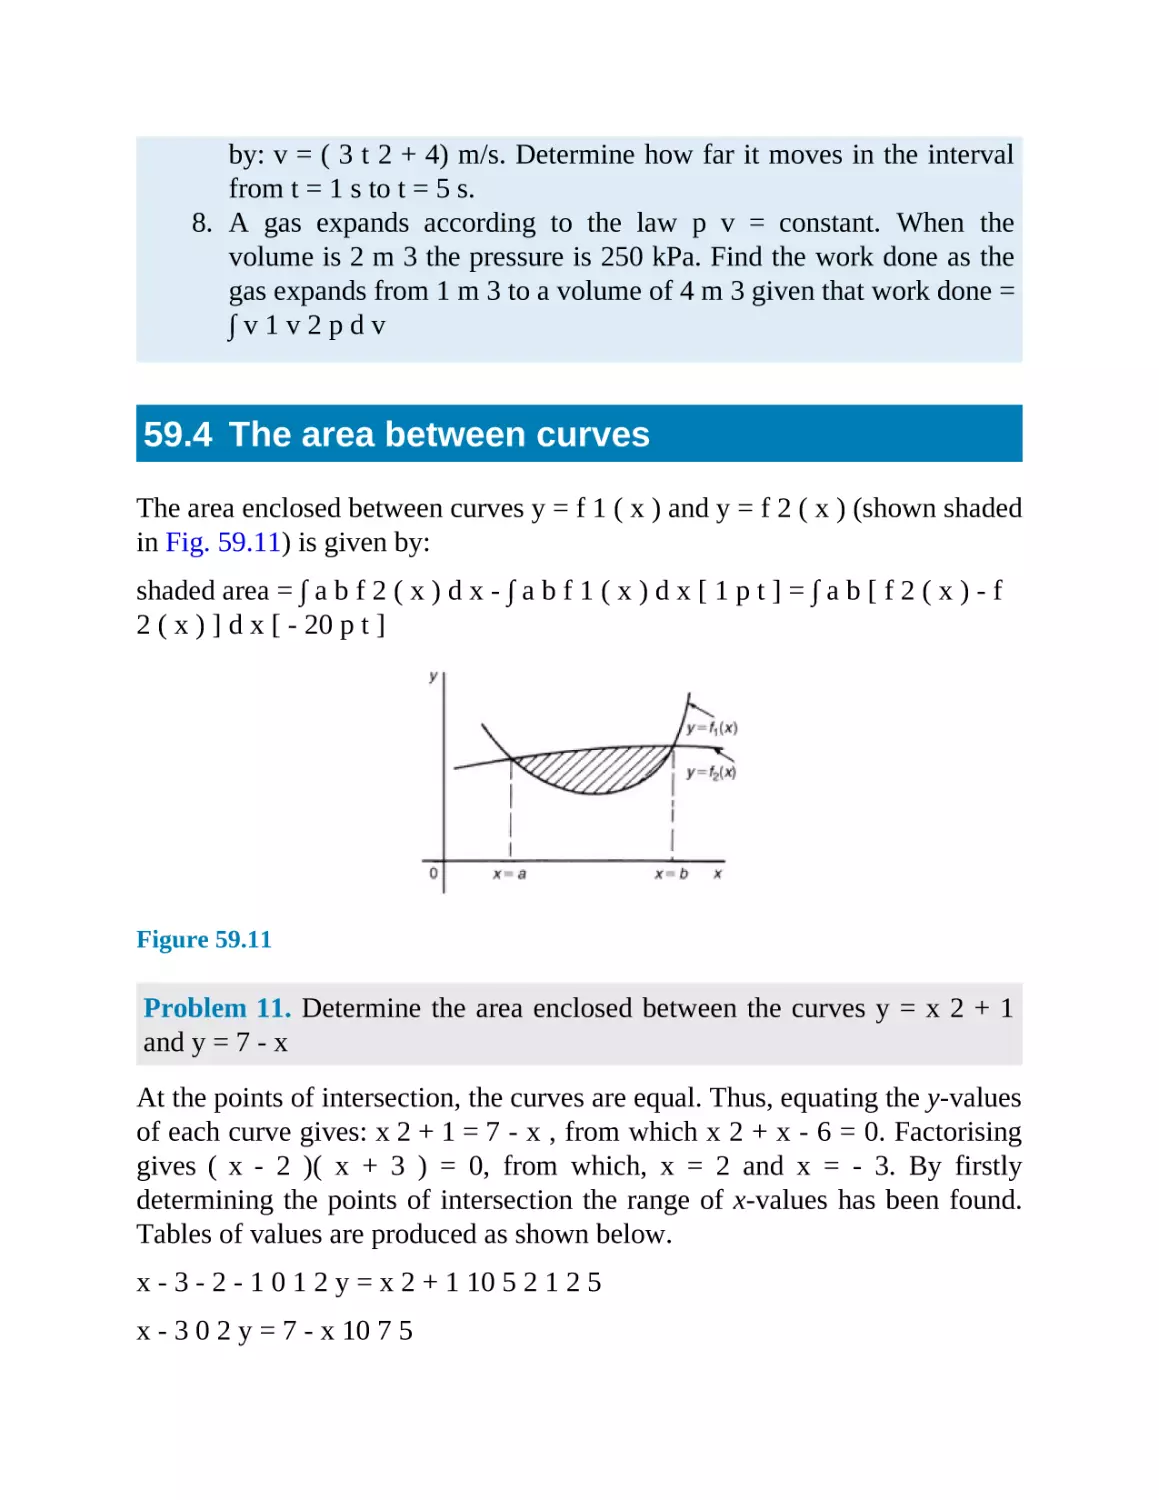 59.4 The area between curves